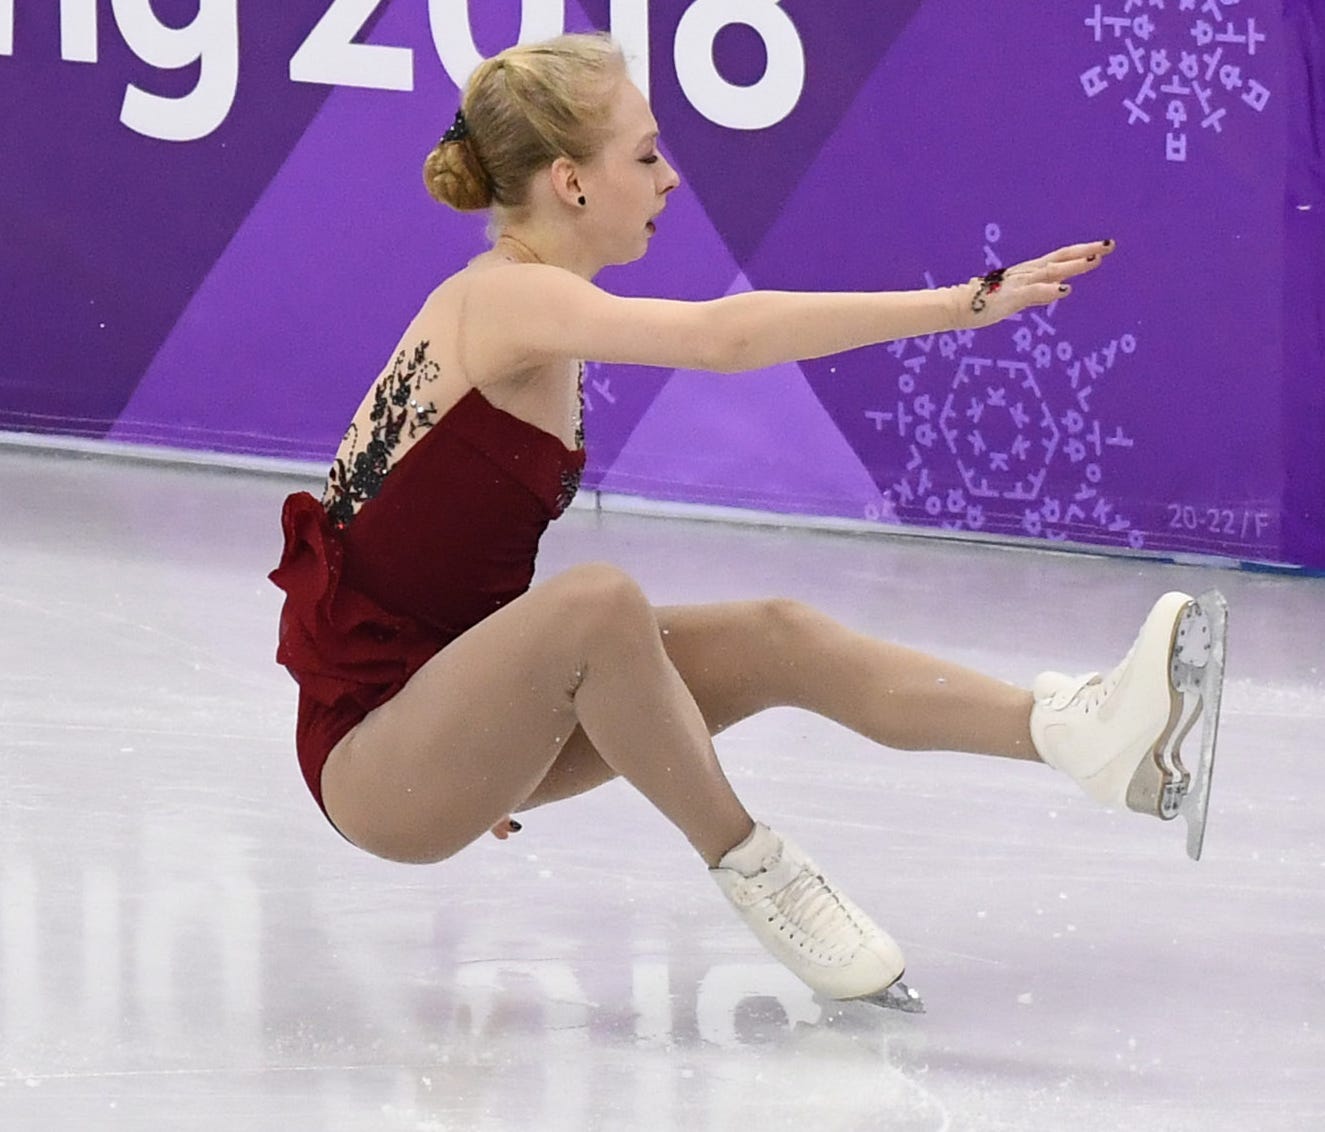 U.S. champ Bradie Tennell falls in her Olympic individual debut.